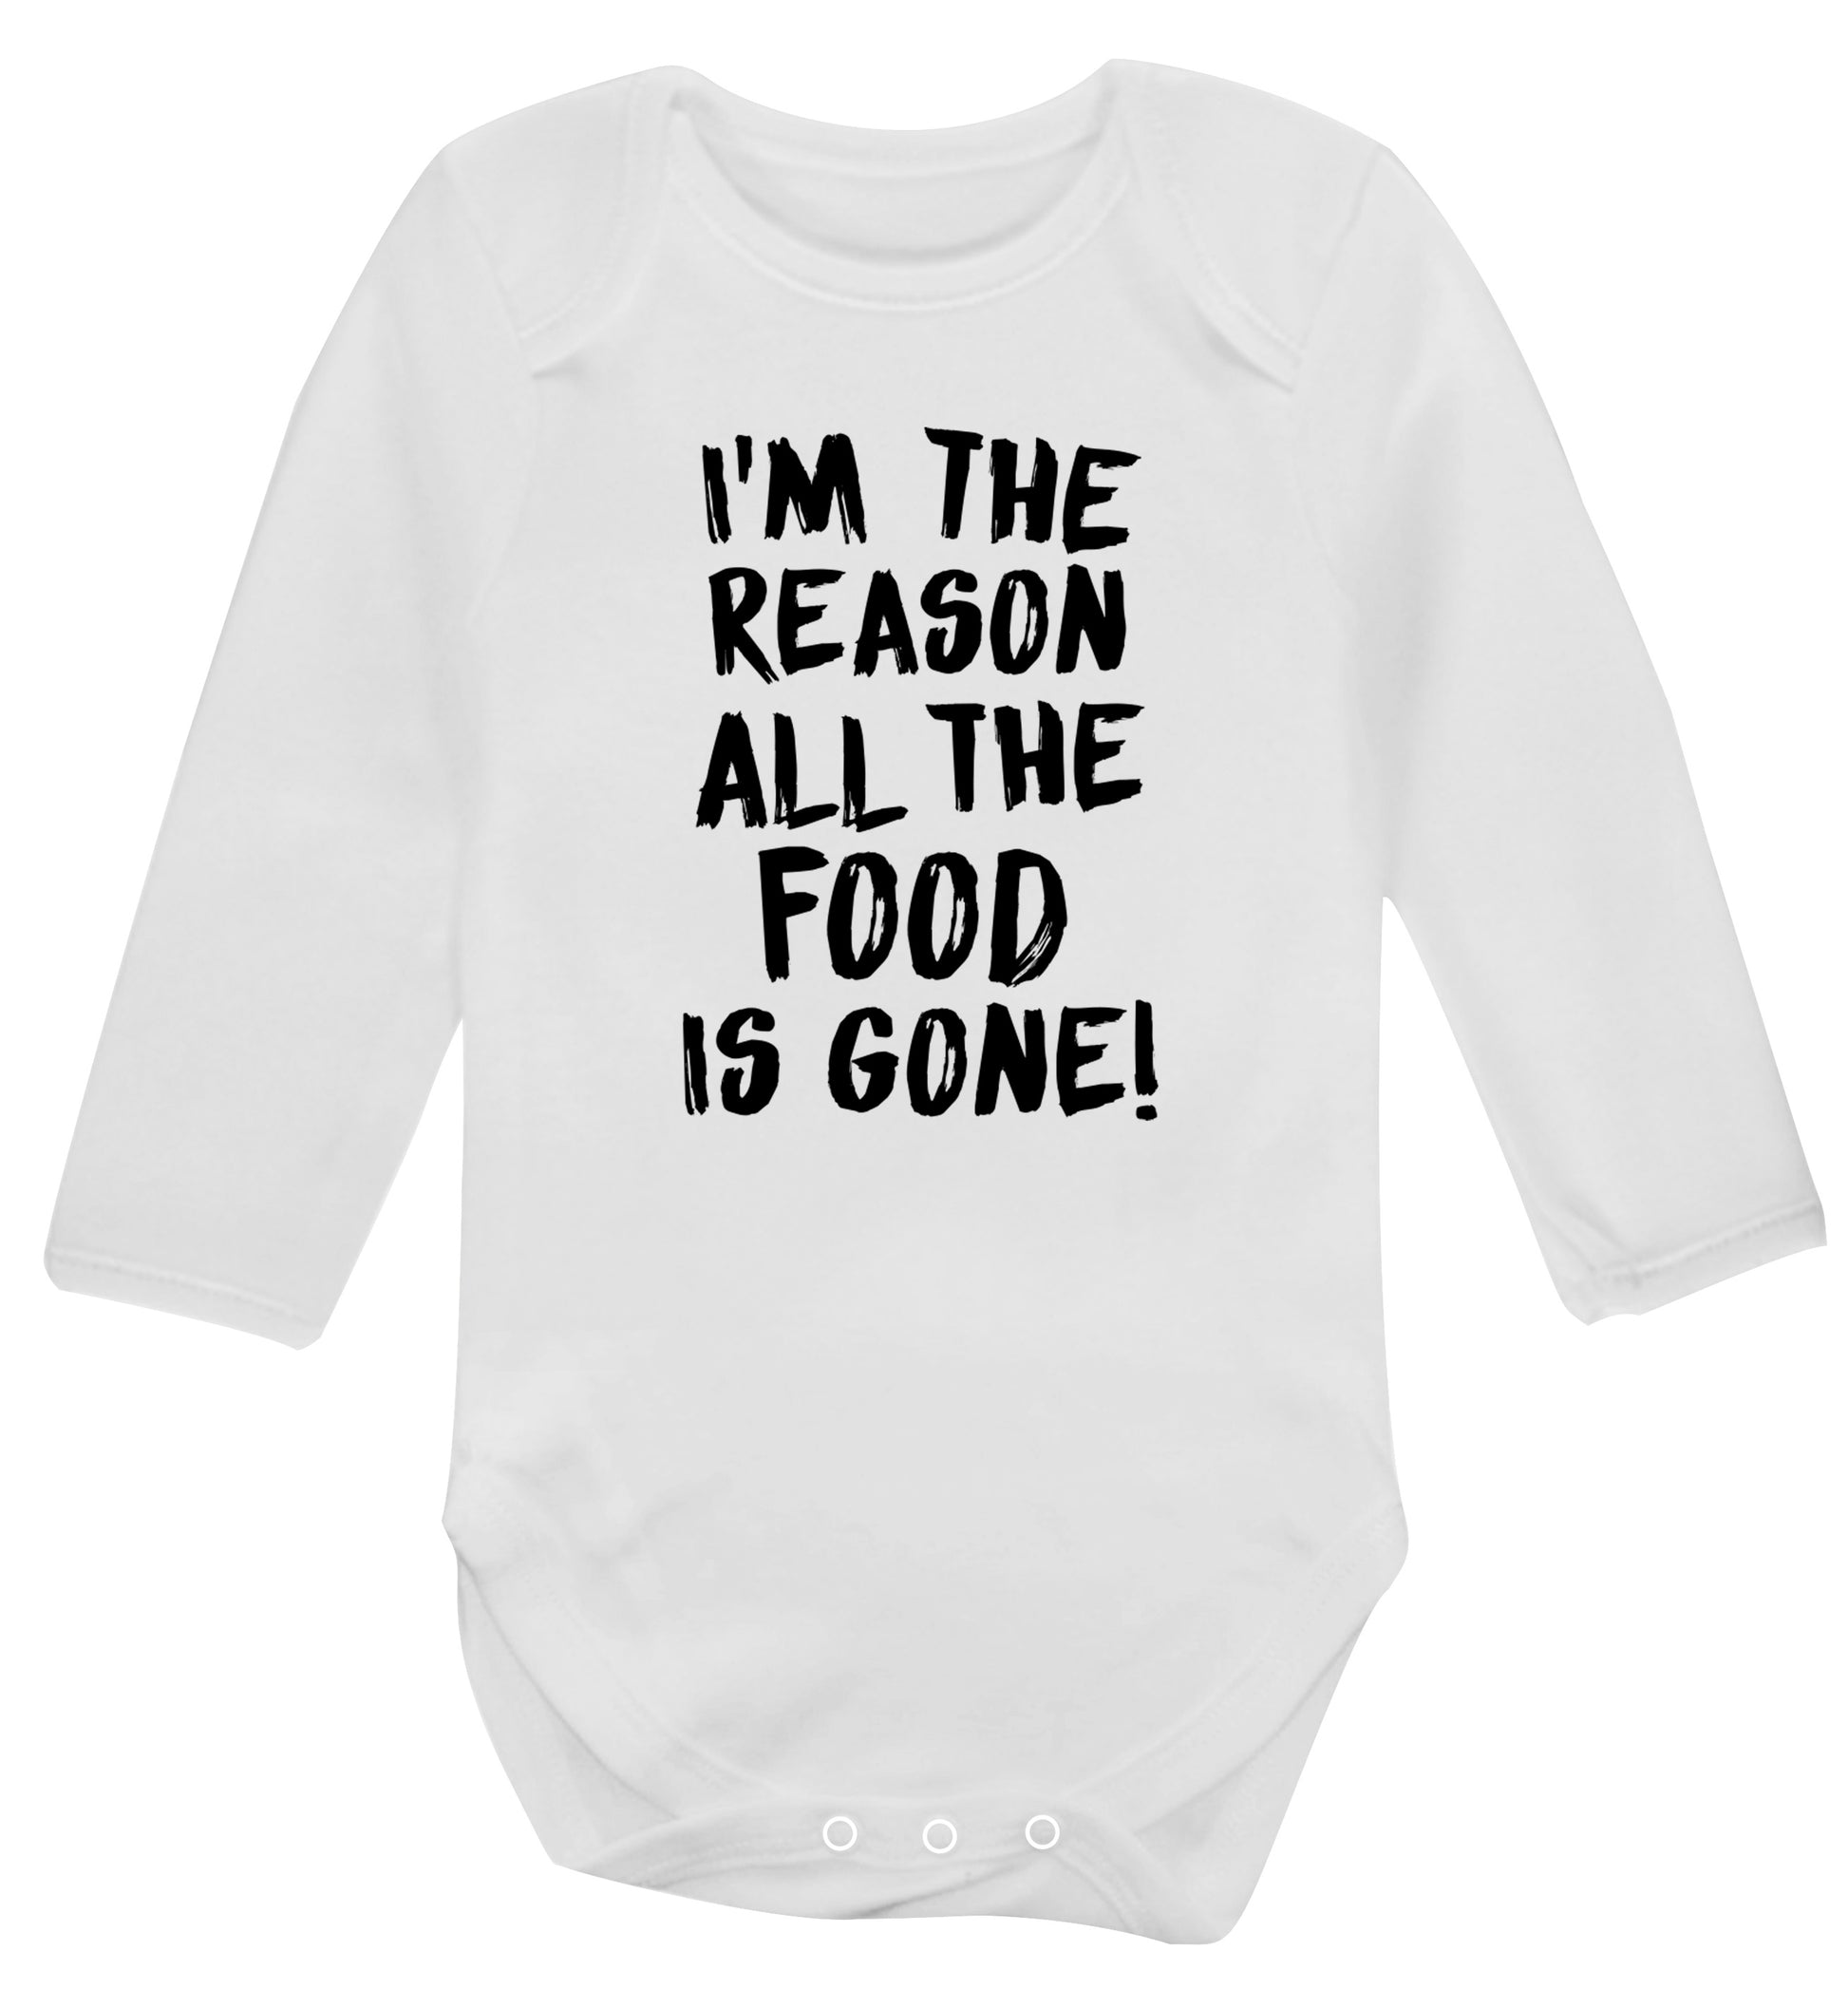 I'm the reason why all the food is gone Baby Vest long sleeved white 6-12 months